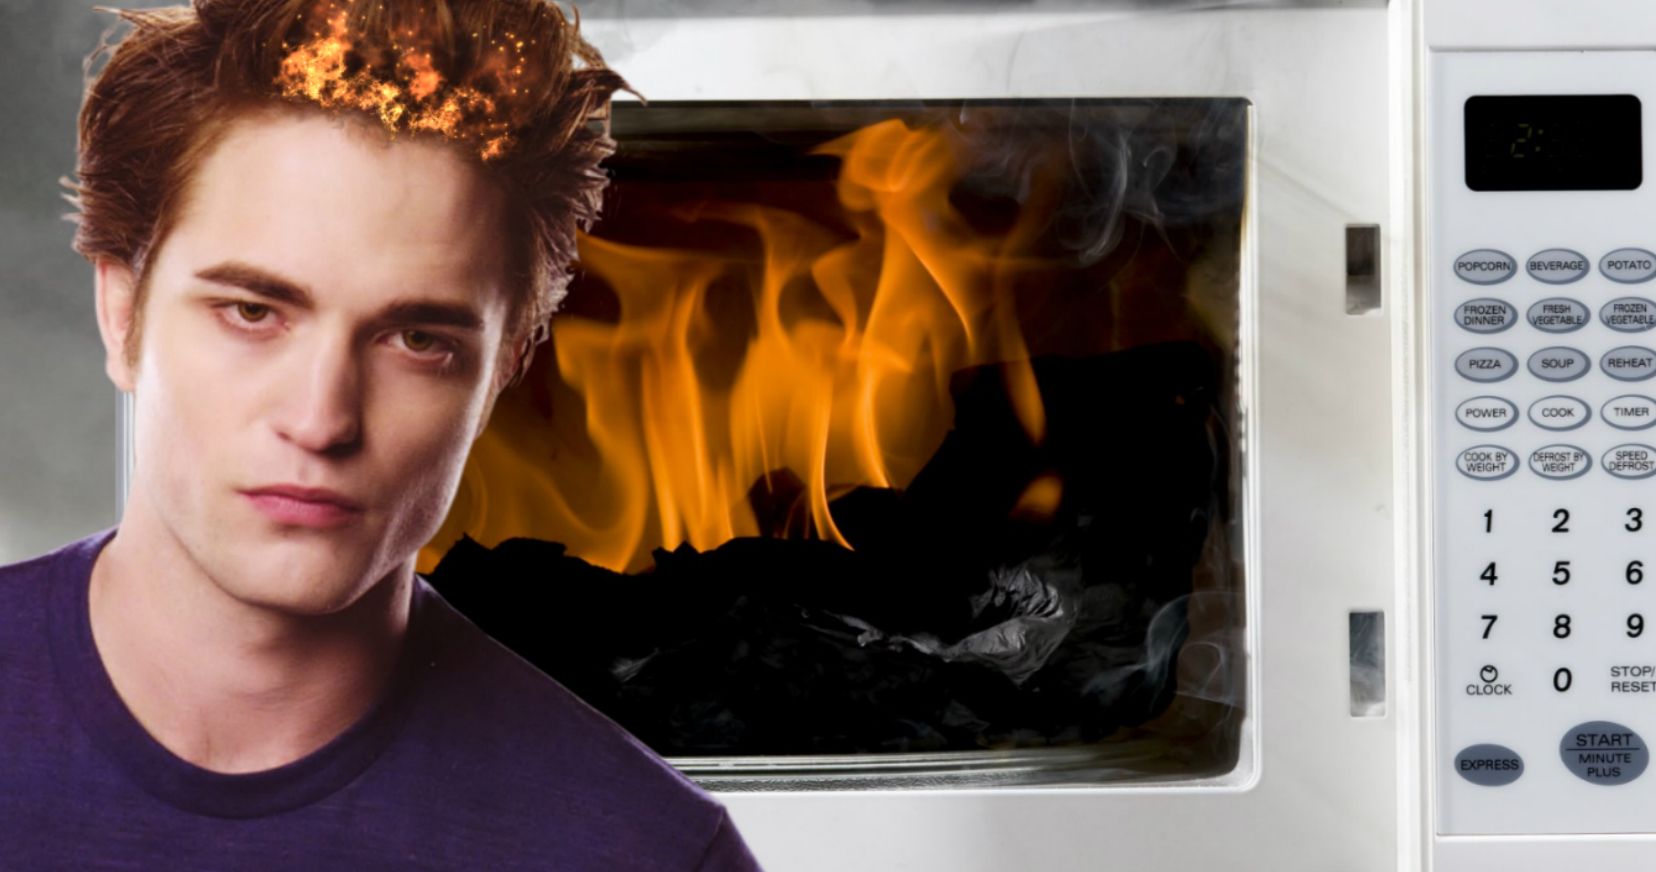 Robert Pattinson Exploded His Microwave Because He Thought It Was an Oven